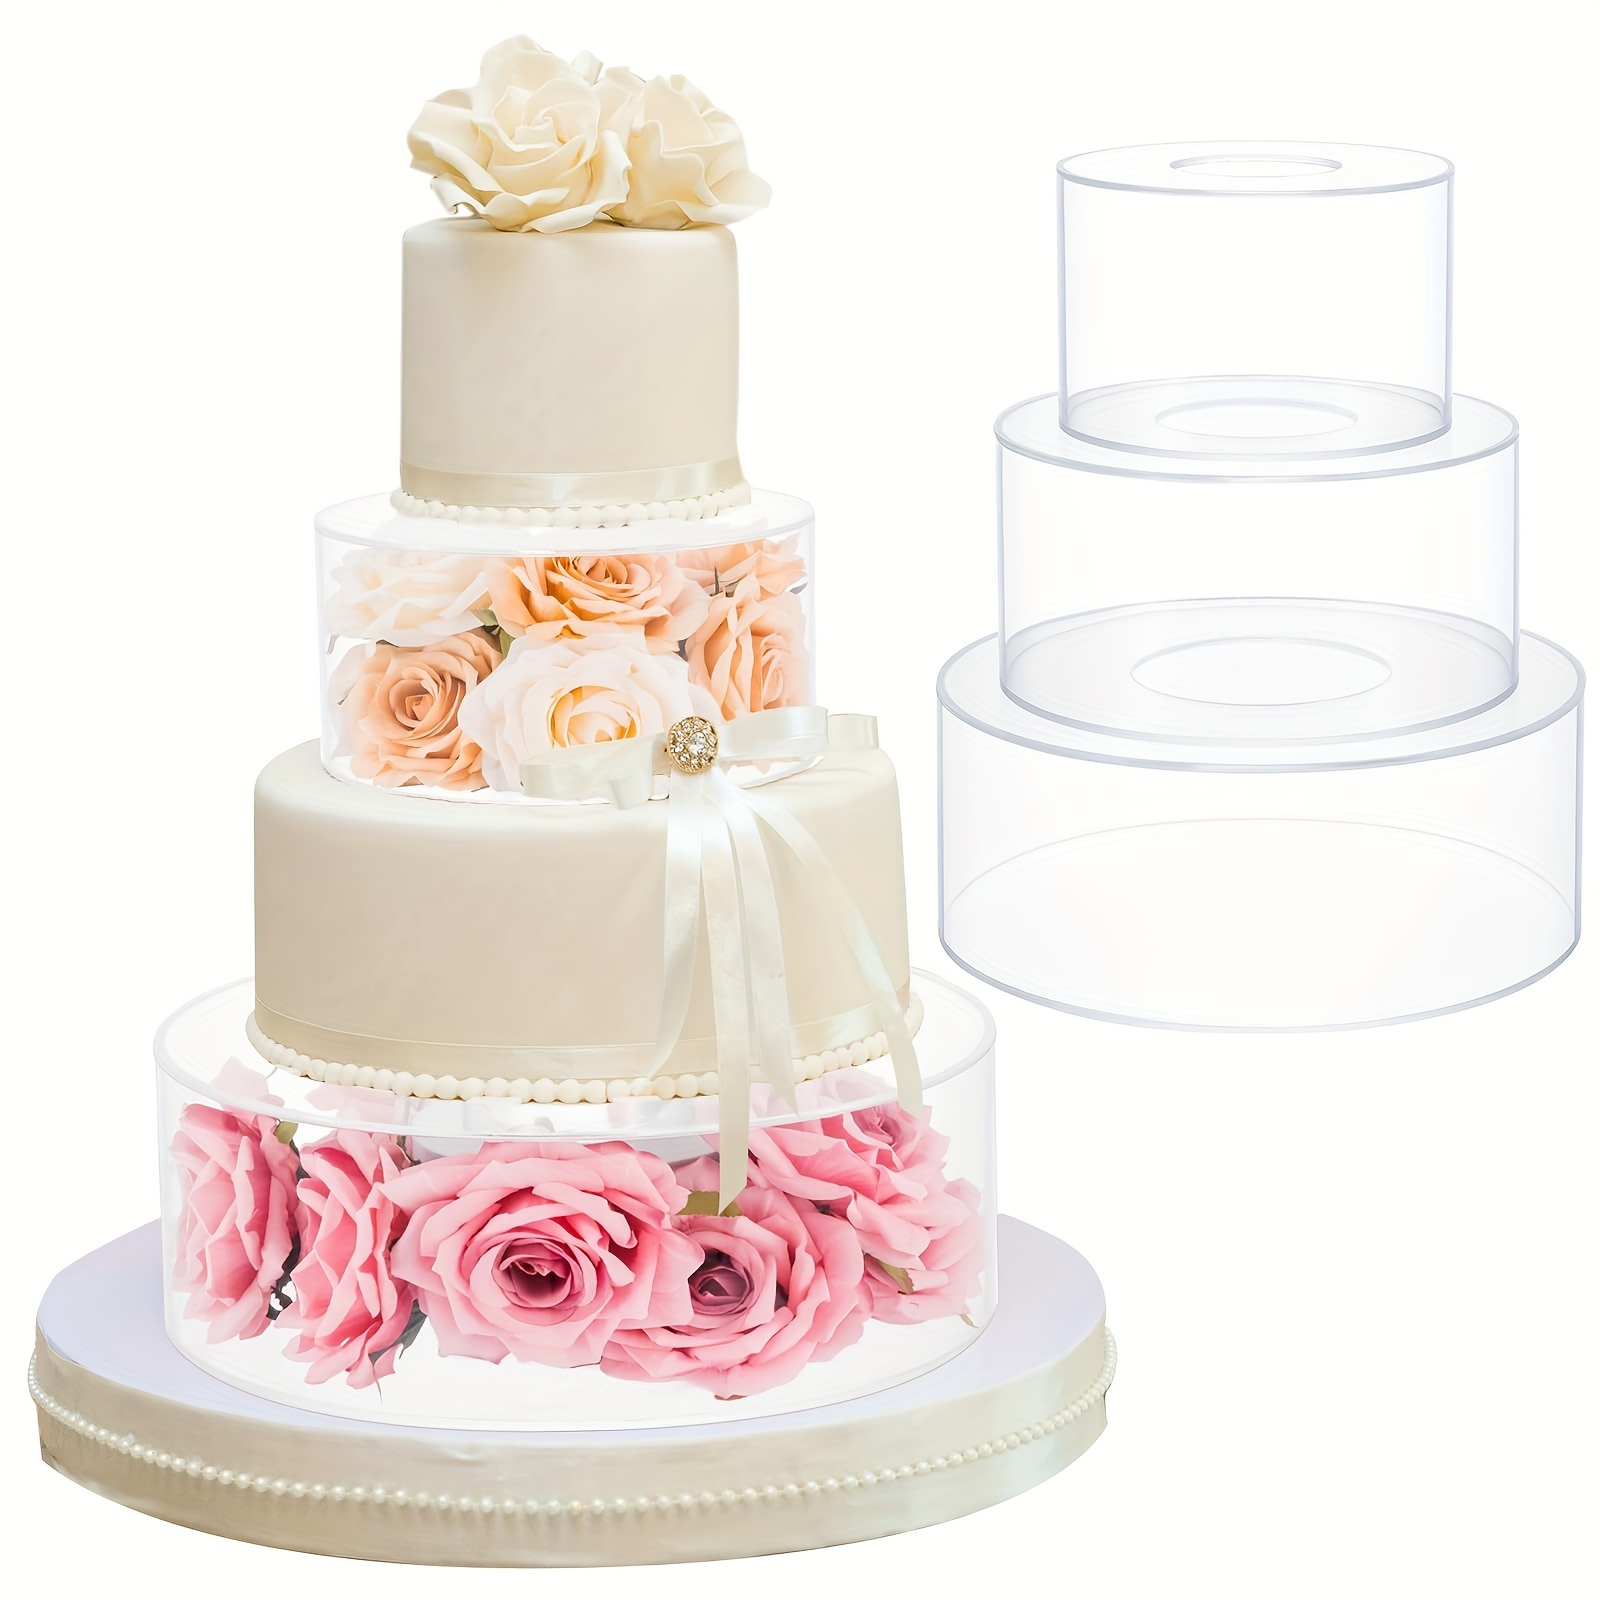 

3pcs/set Acrylic Wedding Event Cake Stand, Clear Fillable Cake Pillars With Lids, For Layered Cake Display, , Decorative Centerpiece For Weddings, Birthdays, Baby Showers